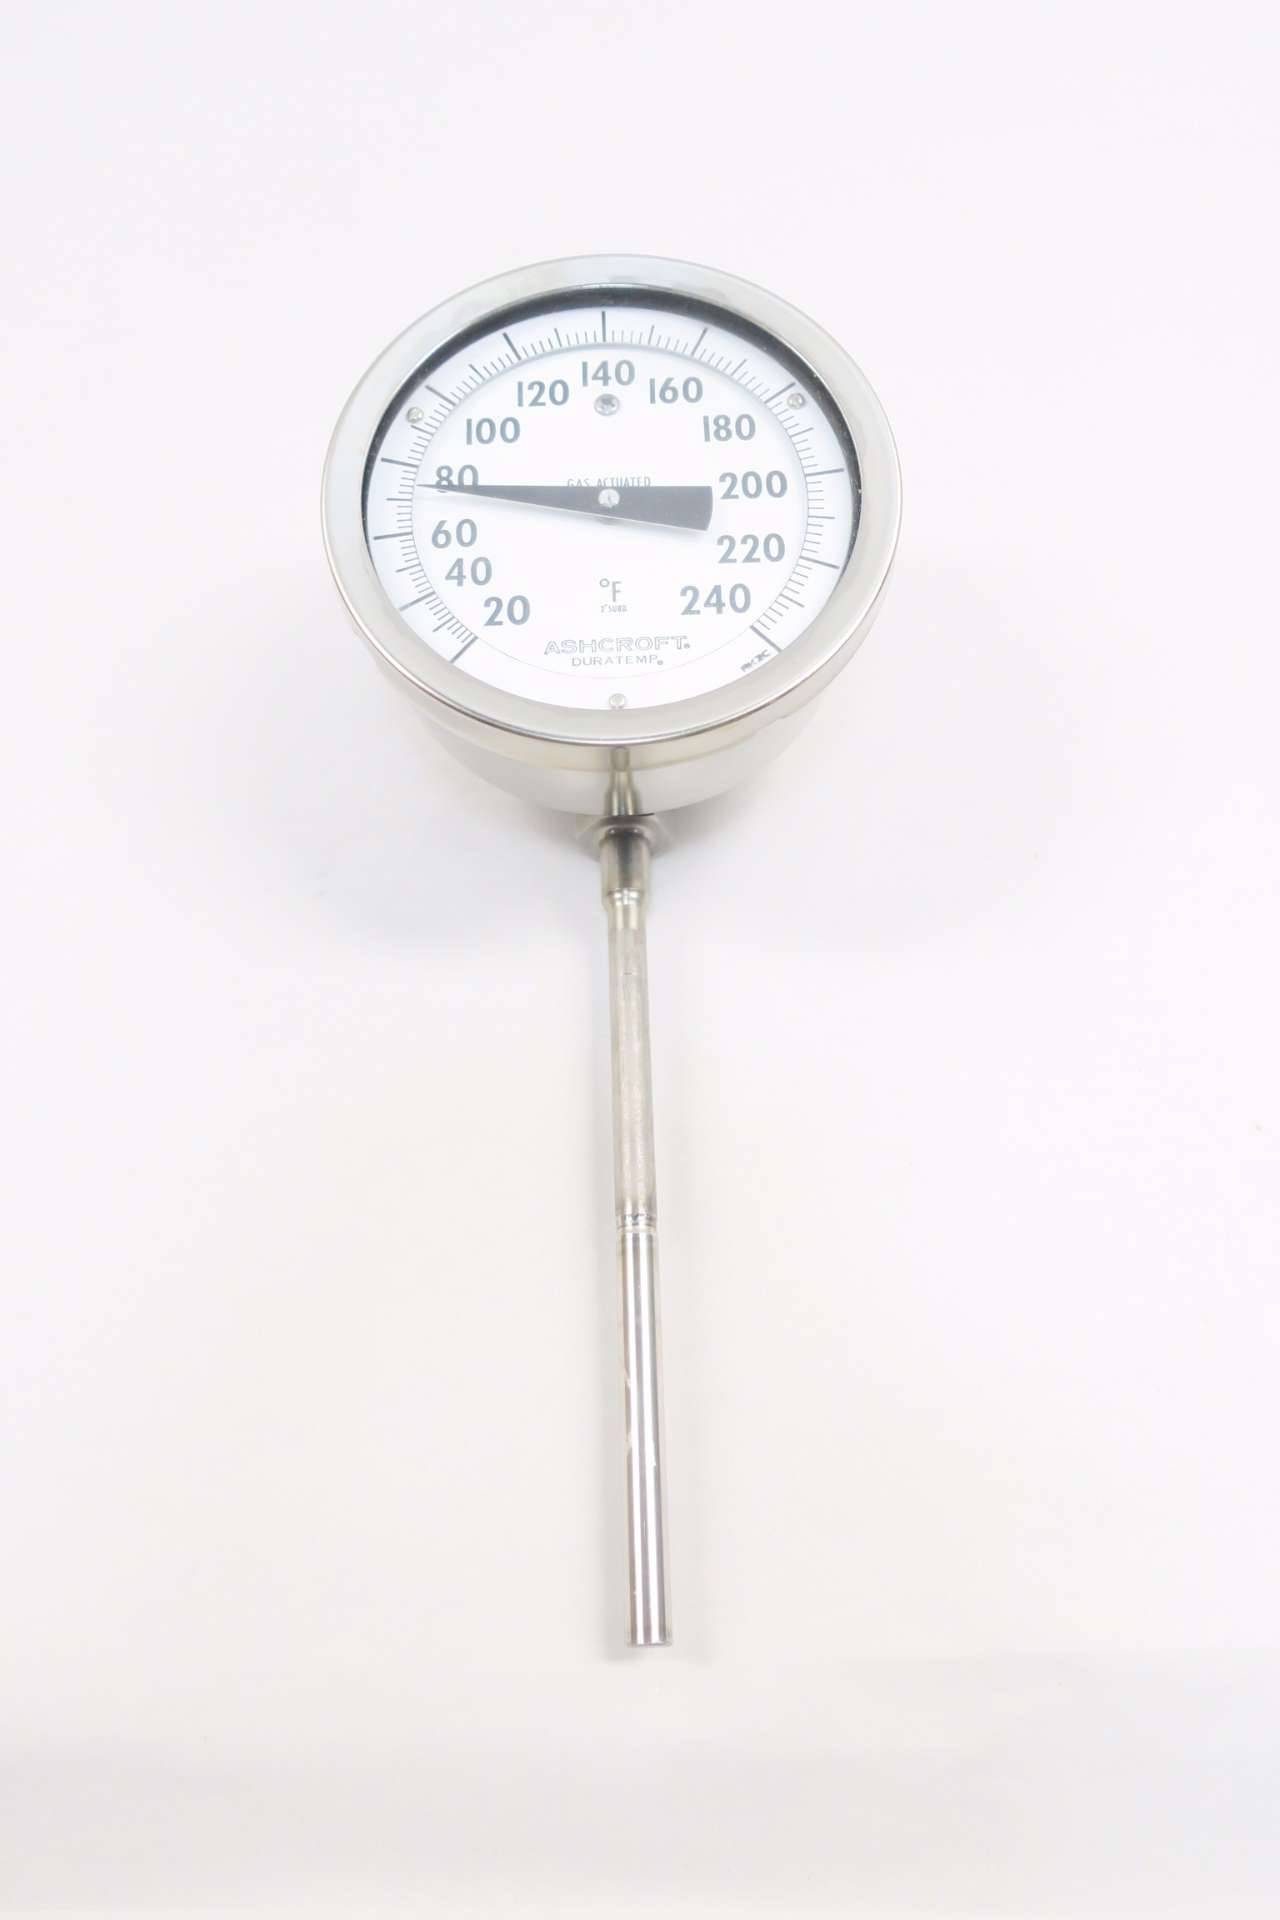 ASHCROFT C-600B-01-AK DURATEMP Gas ACTUATED Thermometer 4-1/2IN 6IN 20-240F 